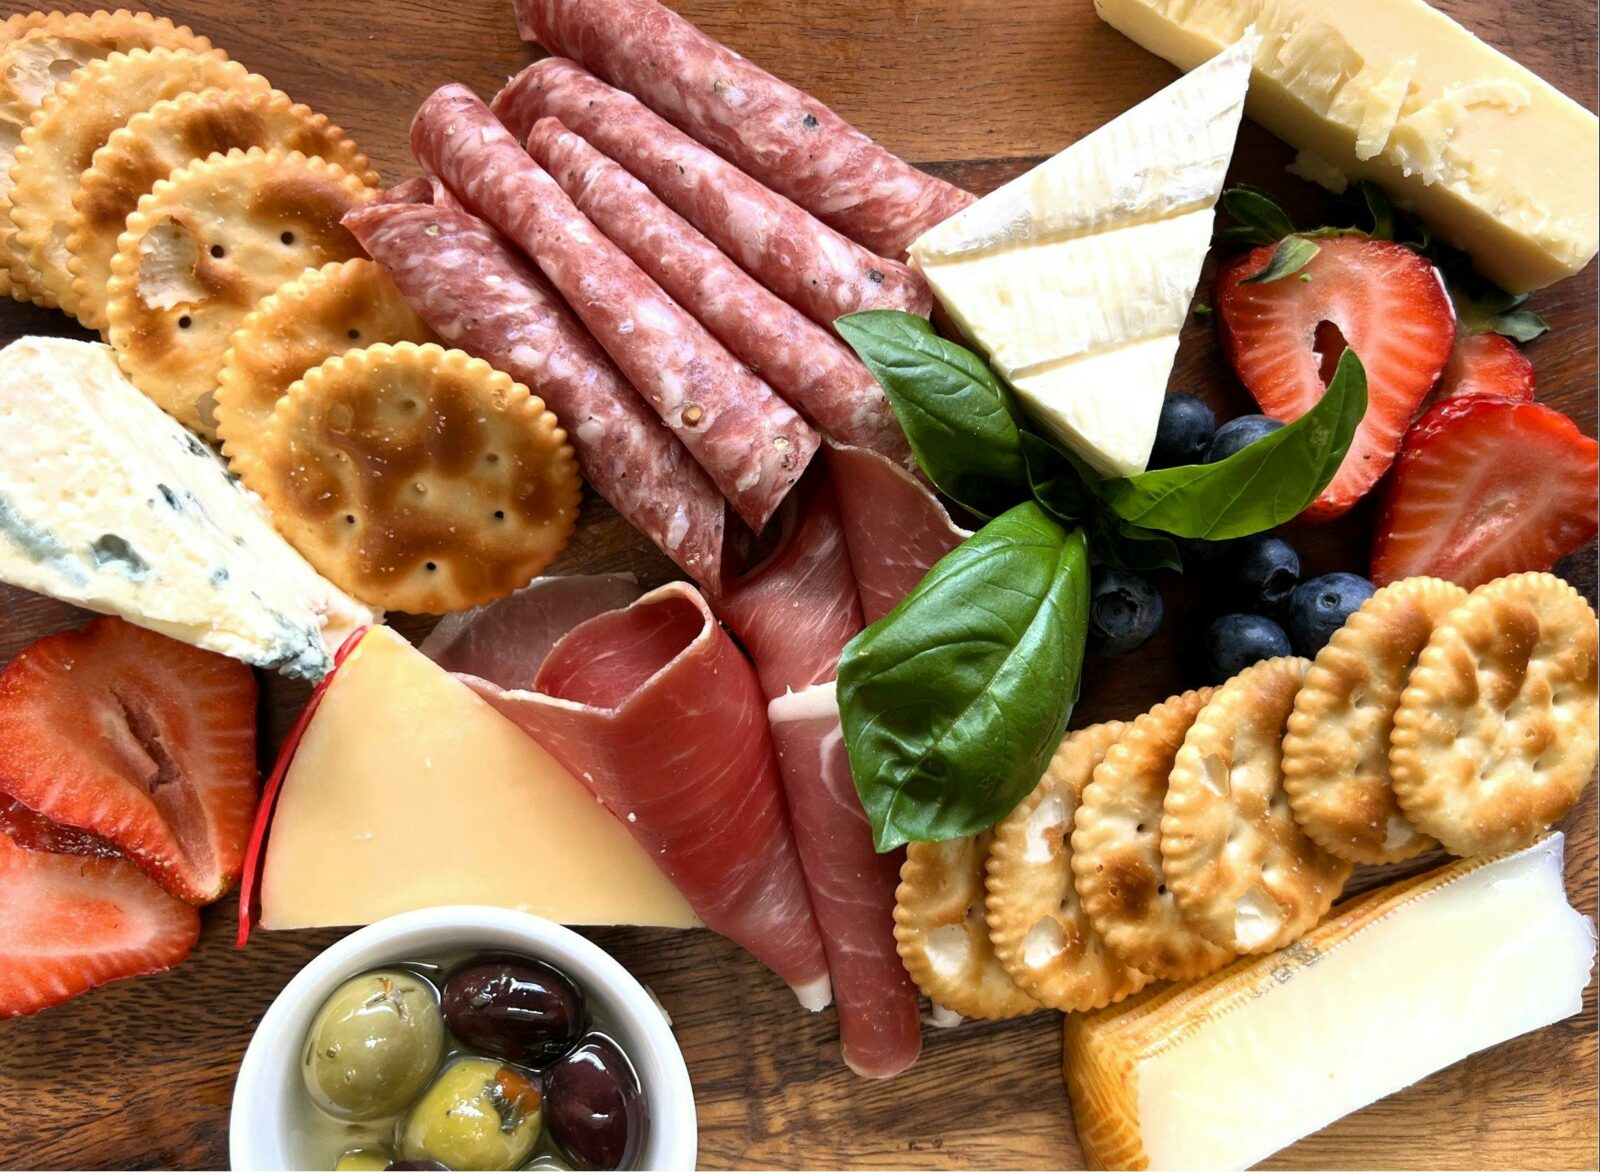 Charcuterie board of cheese, crackers and sliced meats